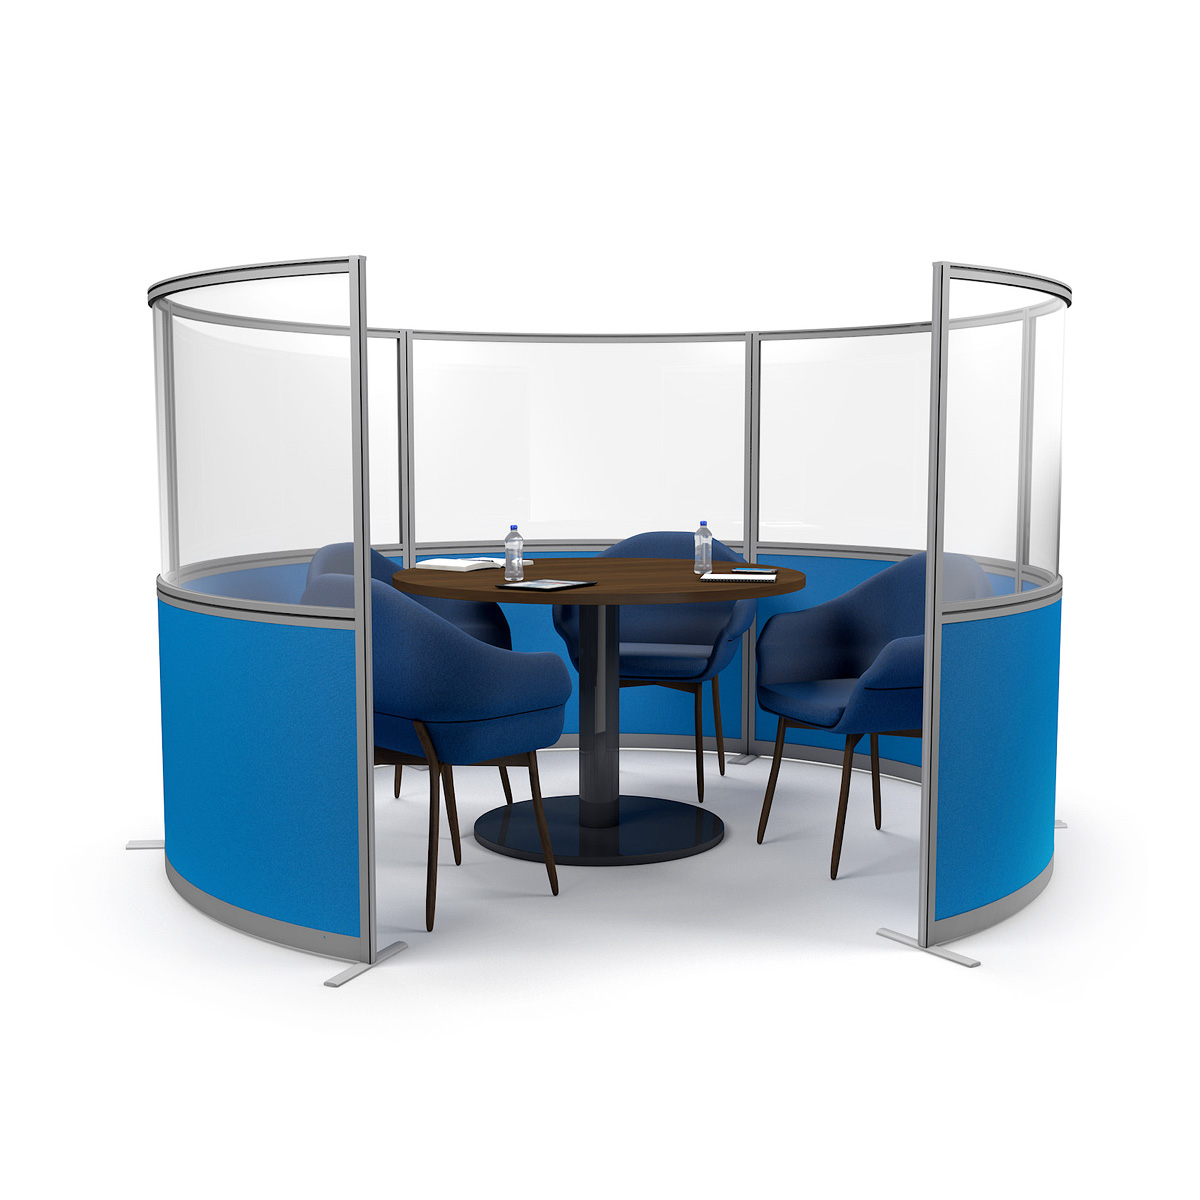 FRONTIER® Curved Glass Perspex® Meeting Pod Cubicle - Link Multiple Curve Screens to Create Meeting Pods Or Private Workstations